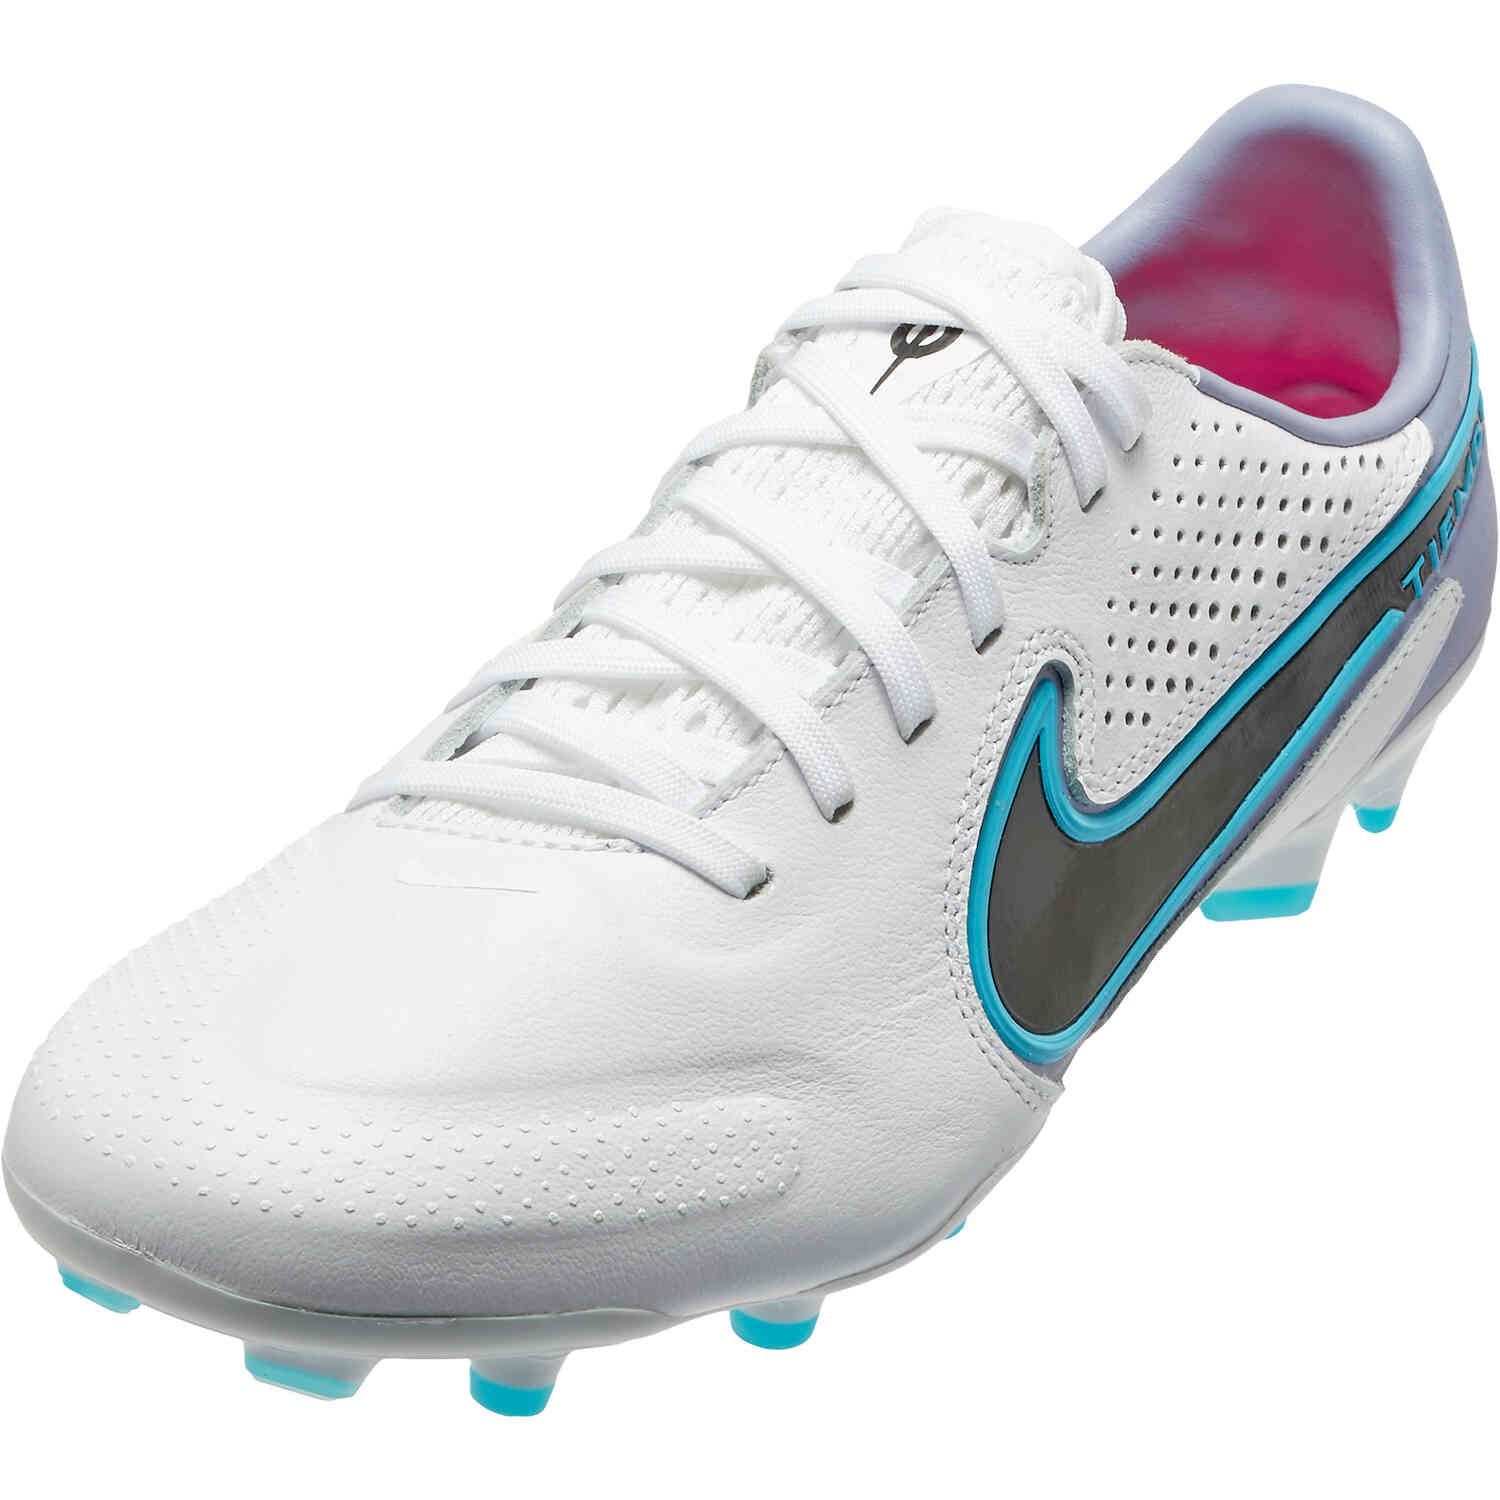 Nike Tiempo Legend Pro Firm Ground Soccer Cleats - White, Black, Baltic Blue & Pink Blast - Soccer Master